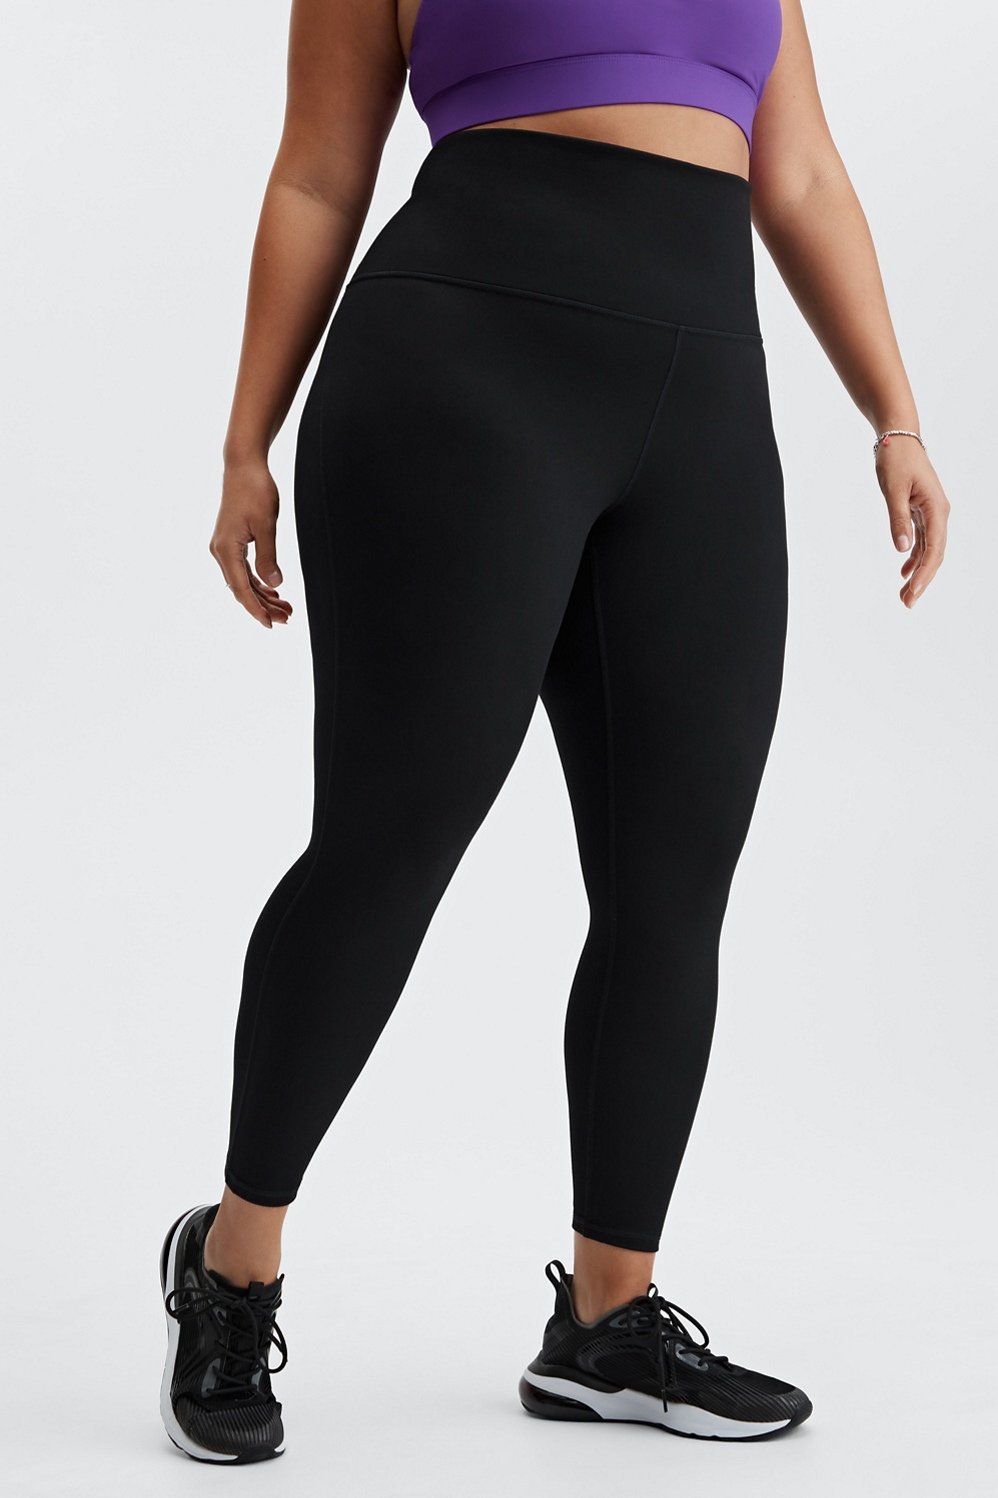 Fabletics Pants Size Medium W25L23 Mosaic High Waisted 7/8 Leggings  Activewear Black - $33 - From Javier